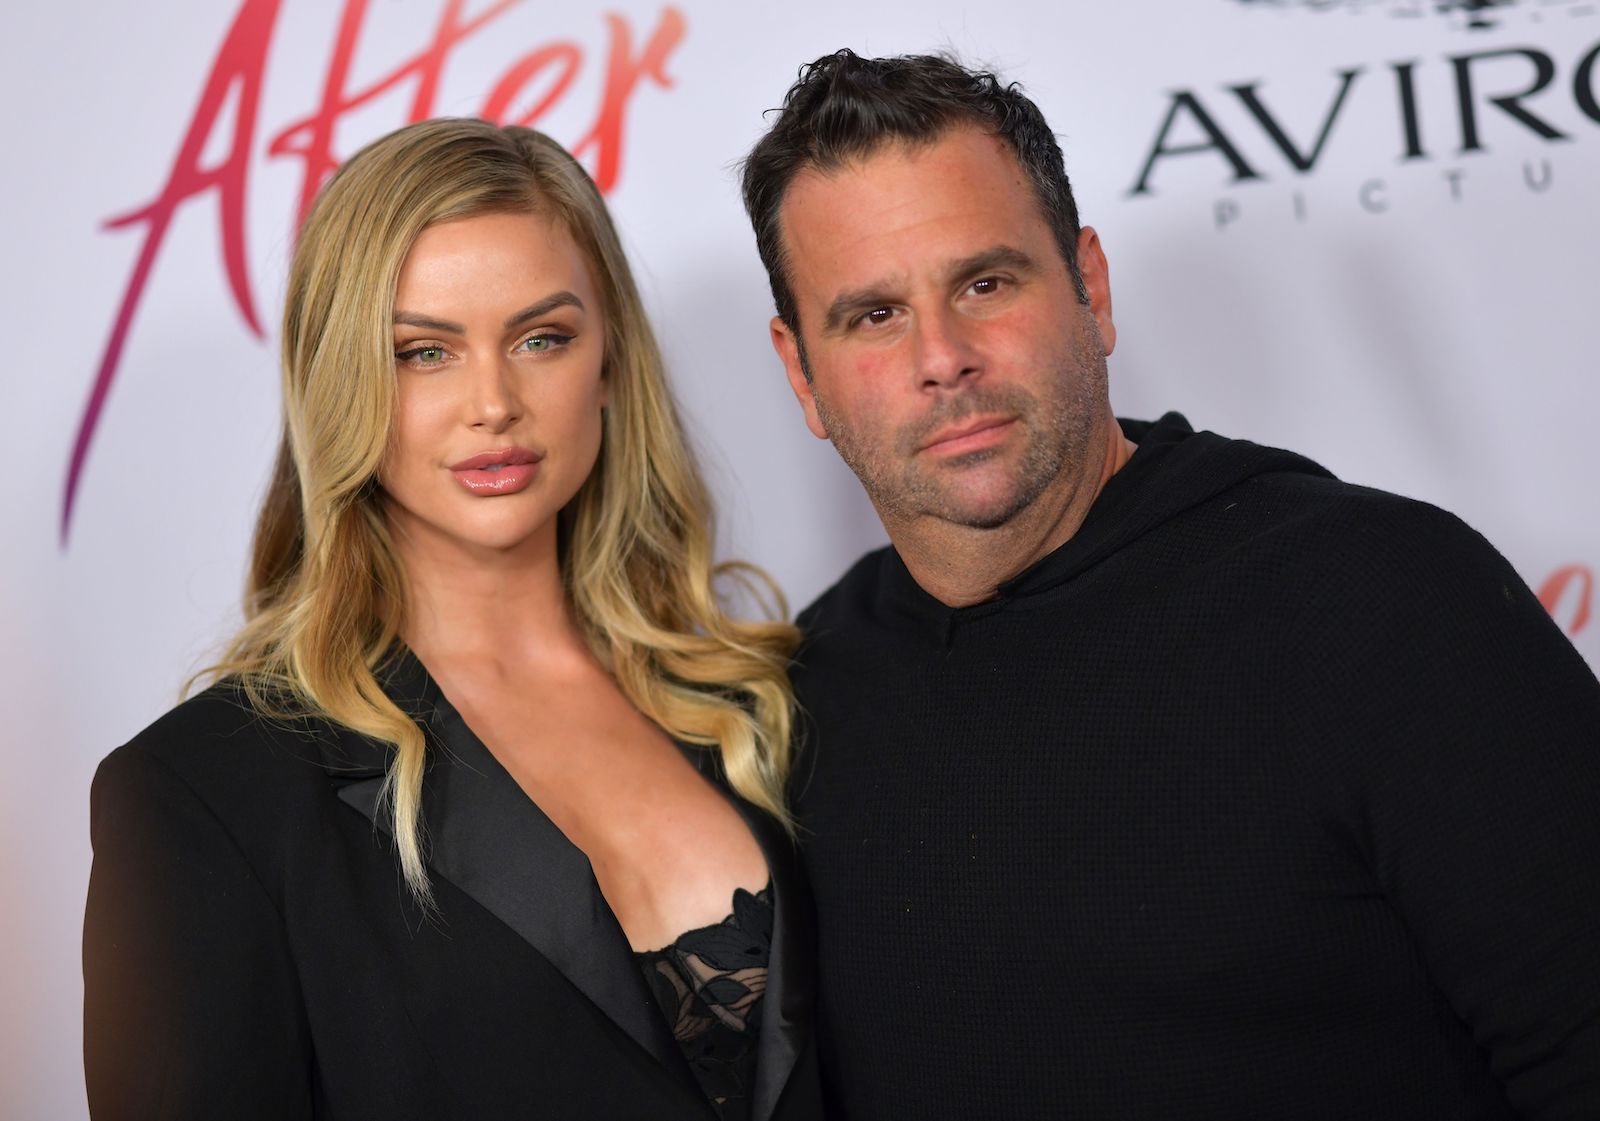 Lala Kent from Vanderpump Rules and Randall Emmett arrived for the premiere of After in 2019 